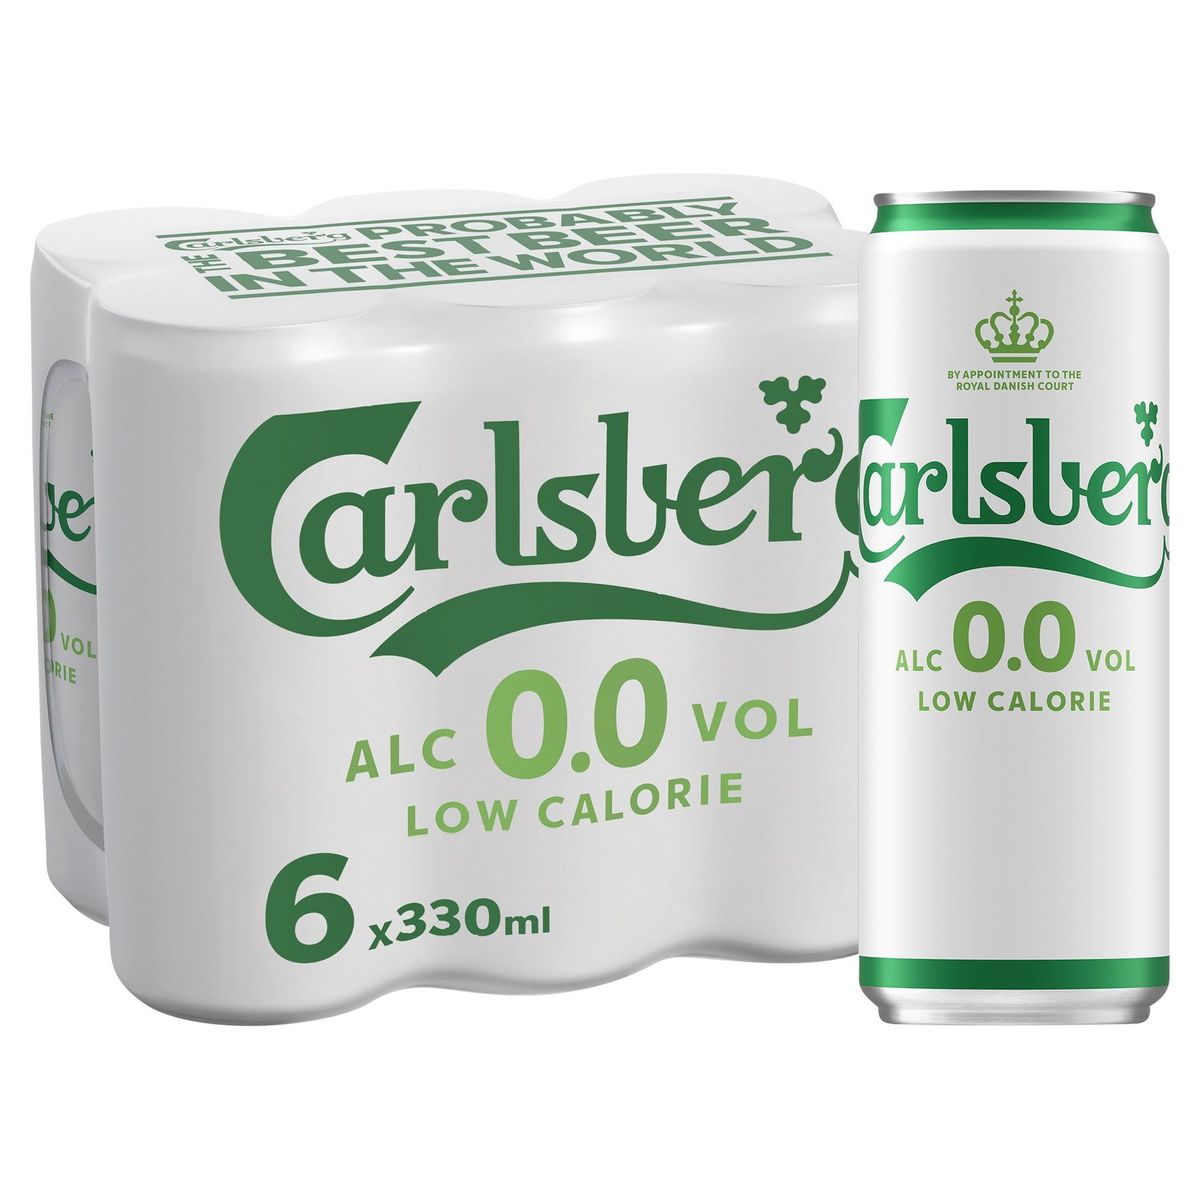 Carlsberg 0.0% Alcohol-Free Beer Canettes 6 x 33 cl